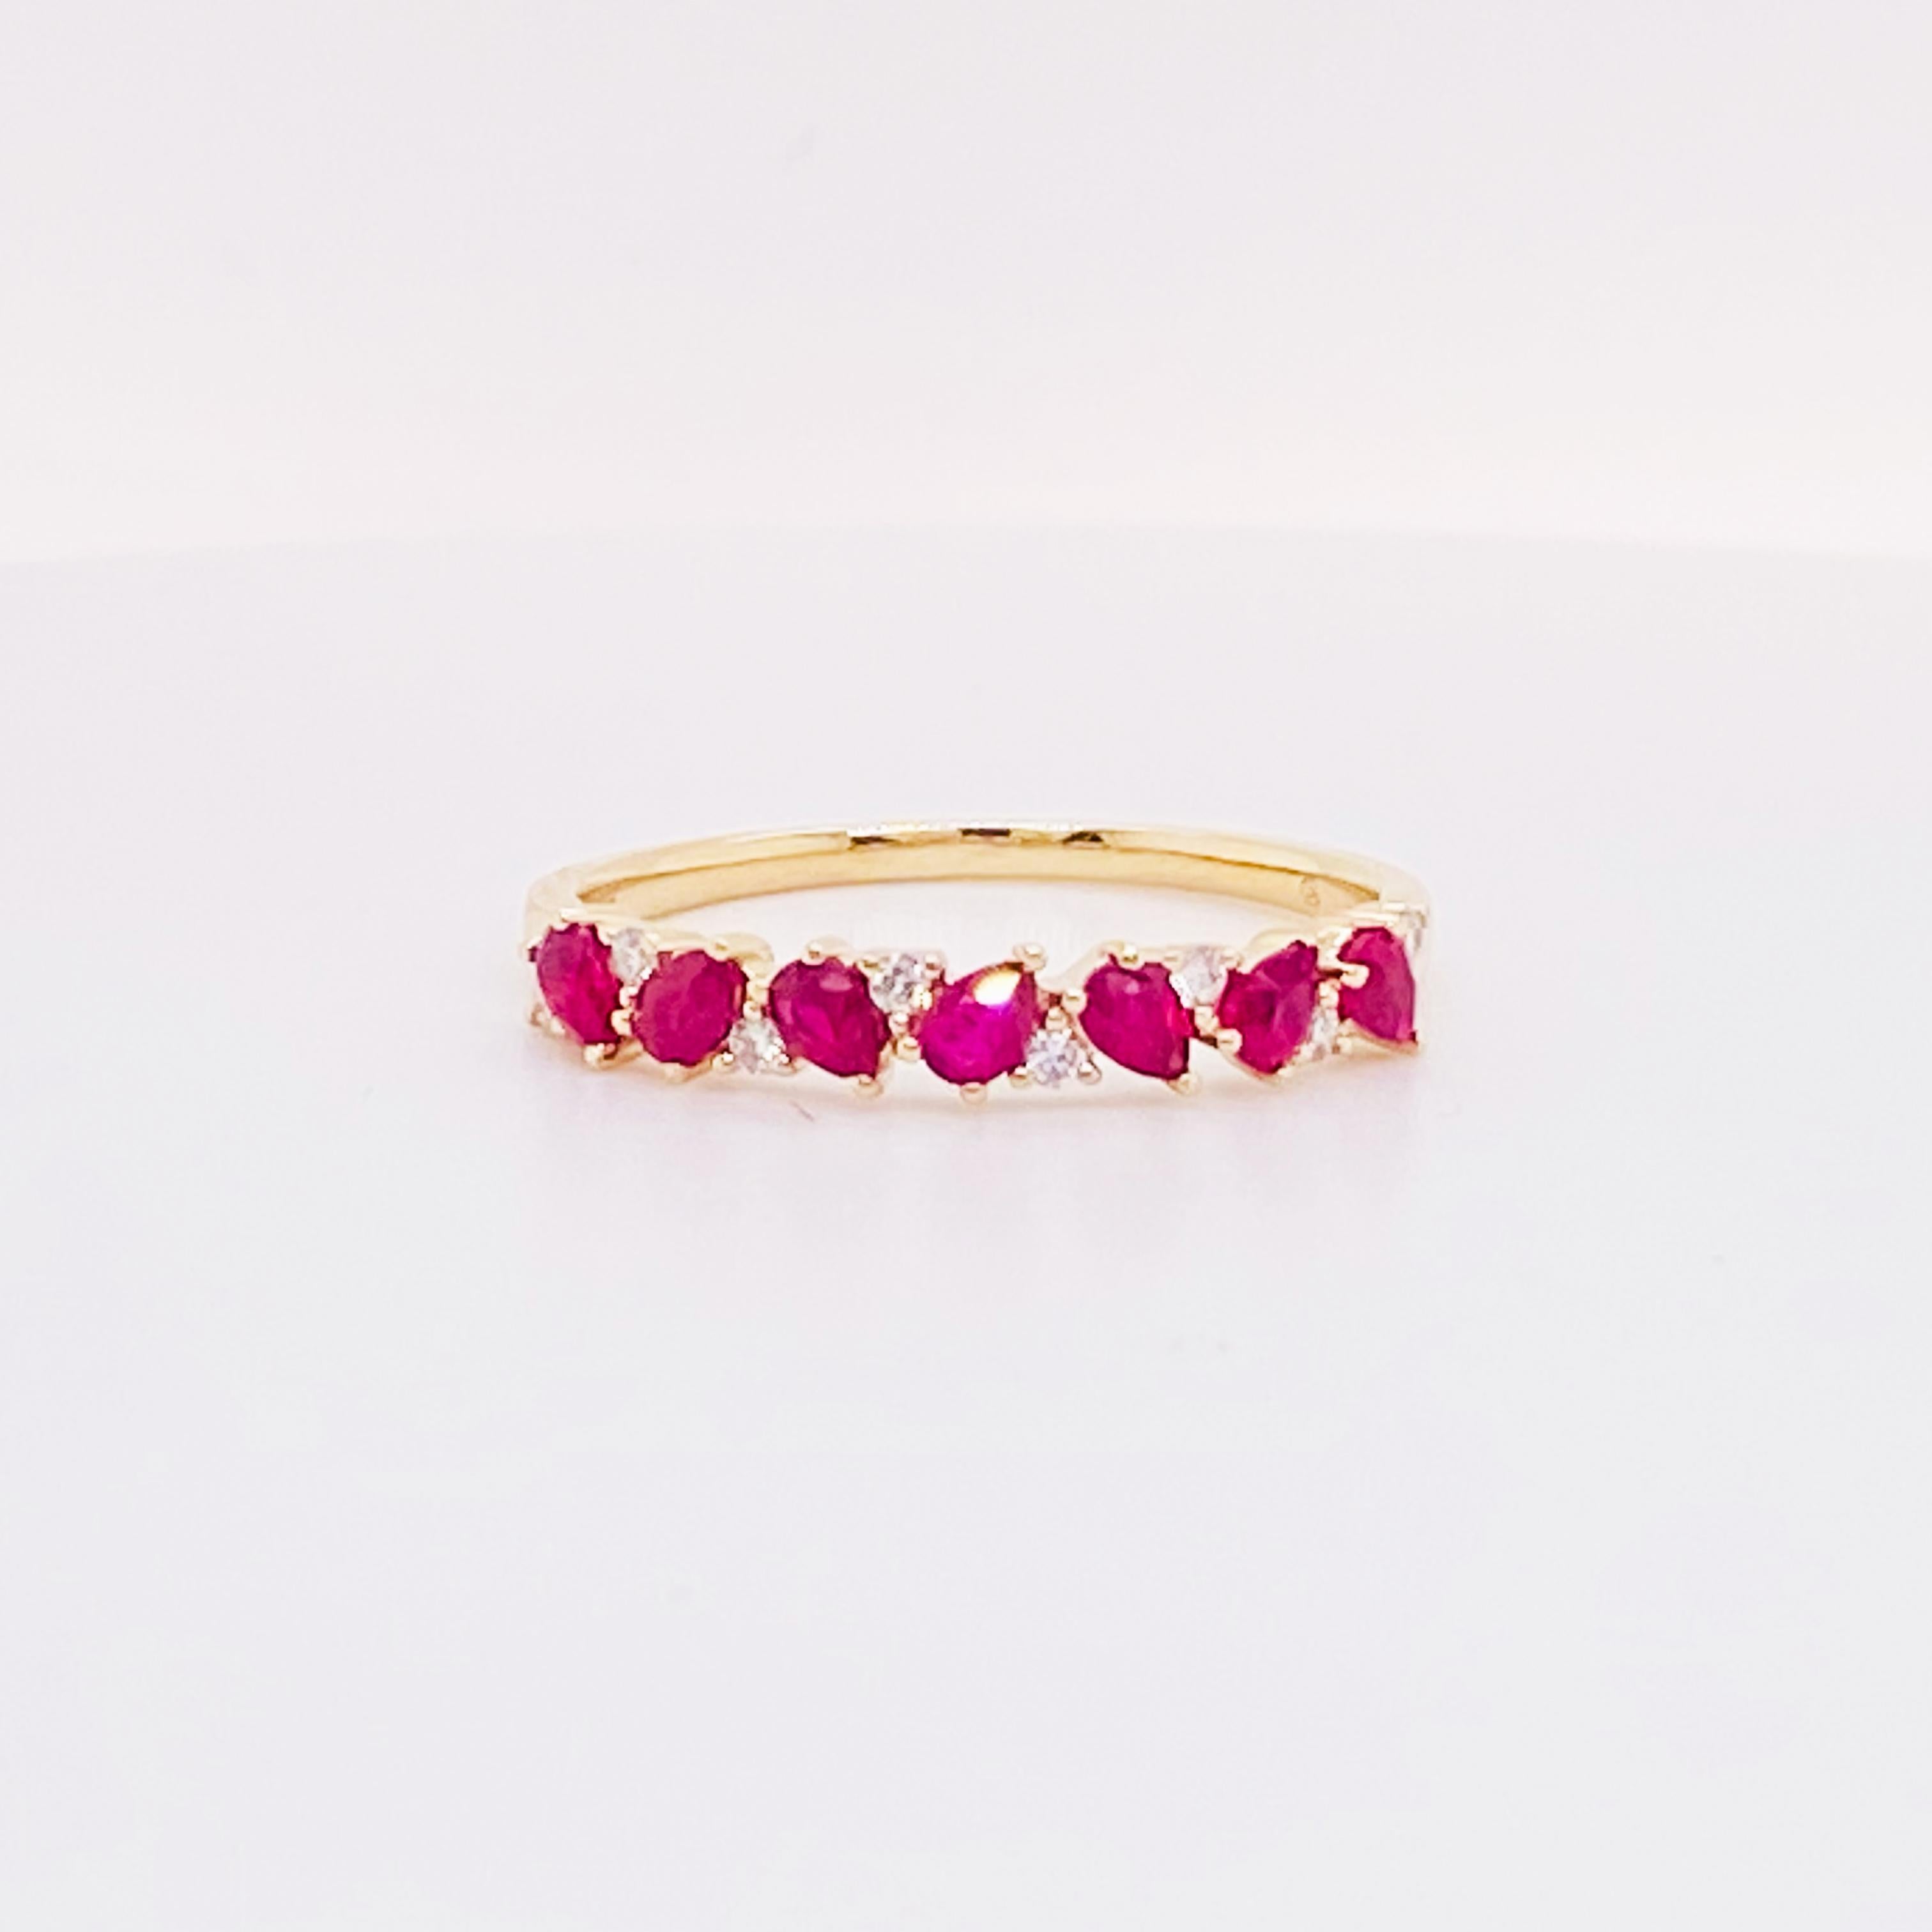 For Sale:  Ruby Diamond Band 14K Gold Pear Shape Ruby Interesting Stackable Band, Sizable 4